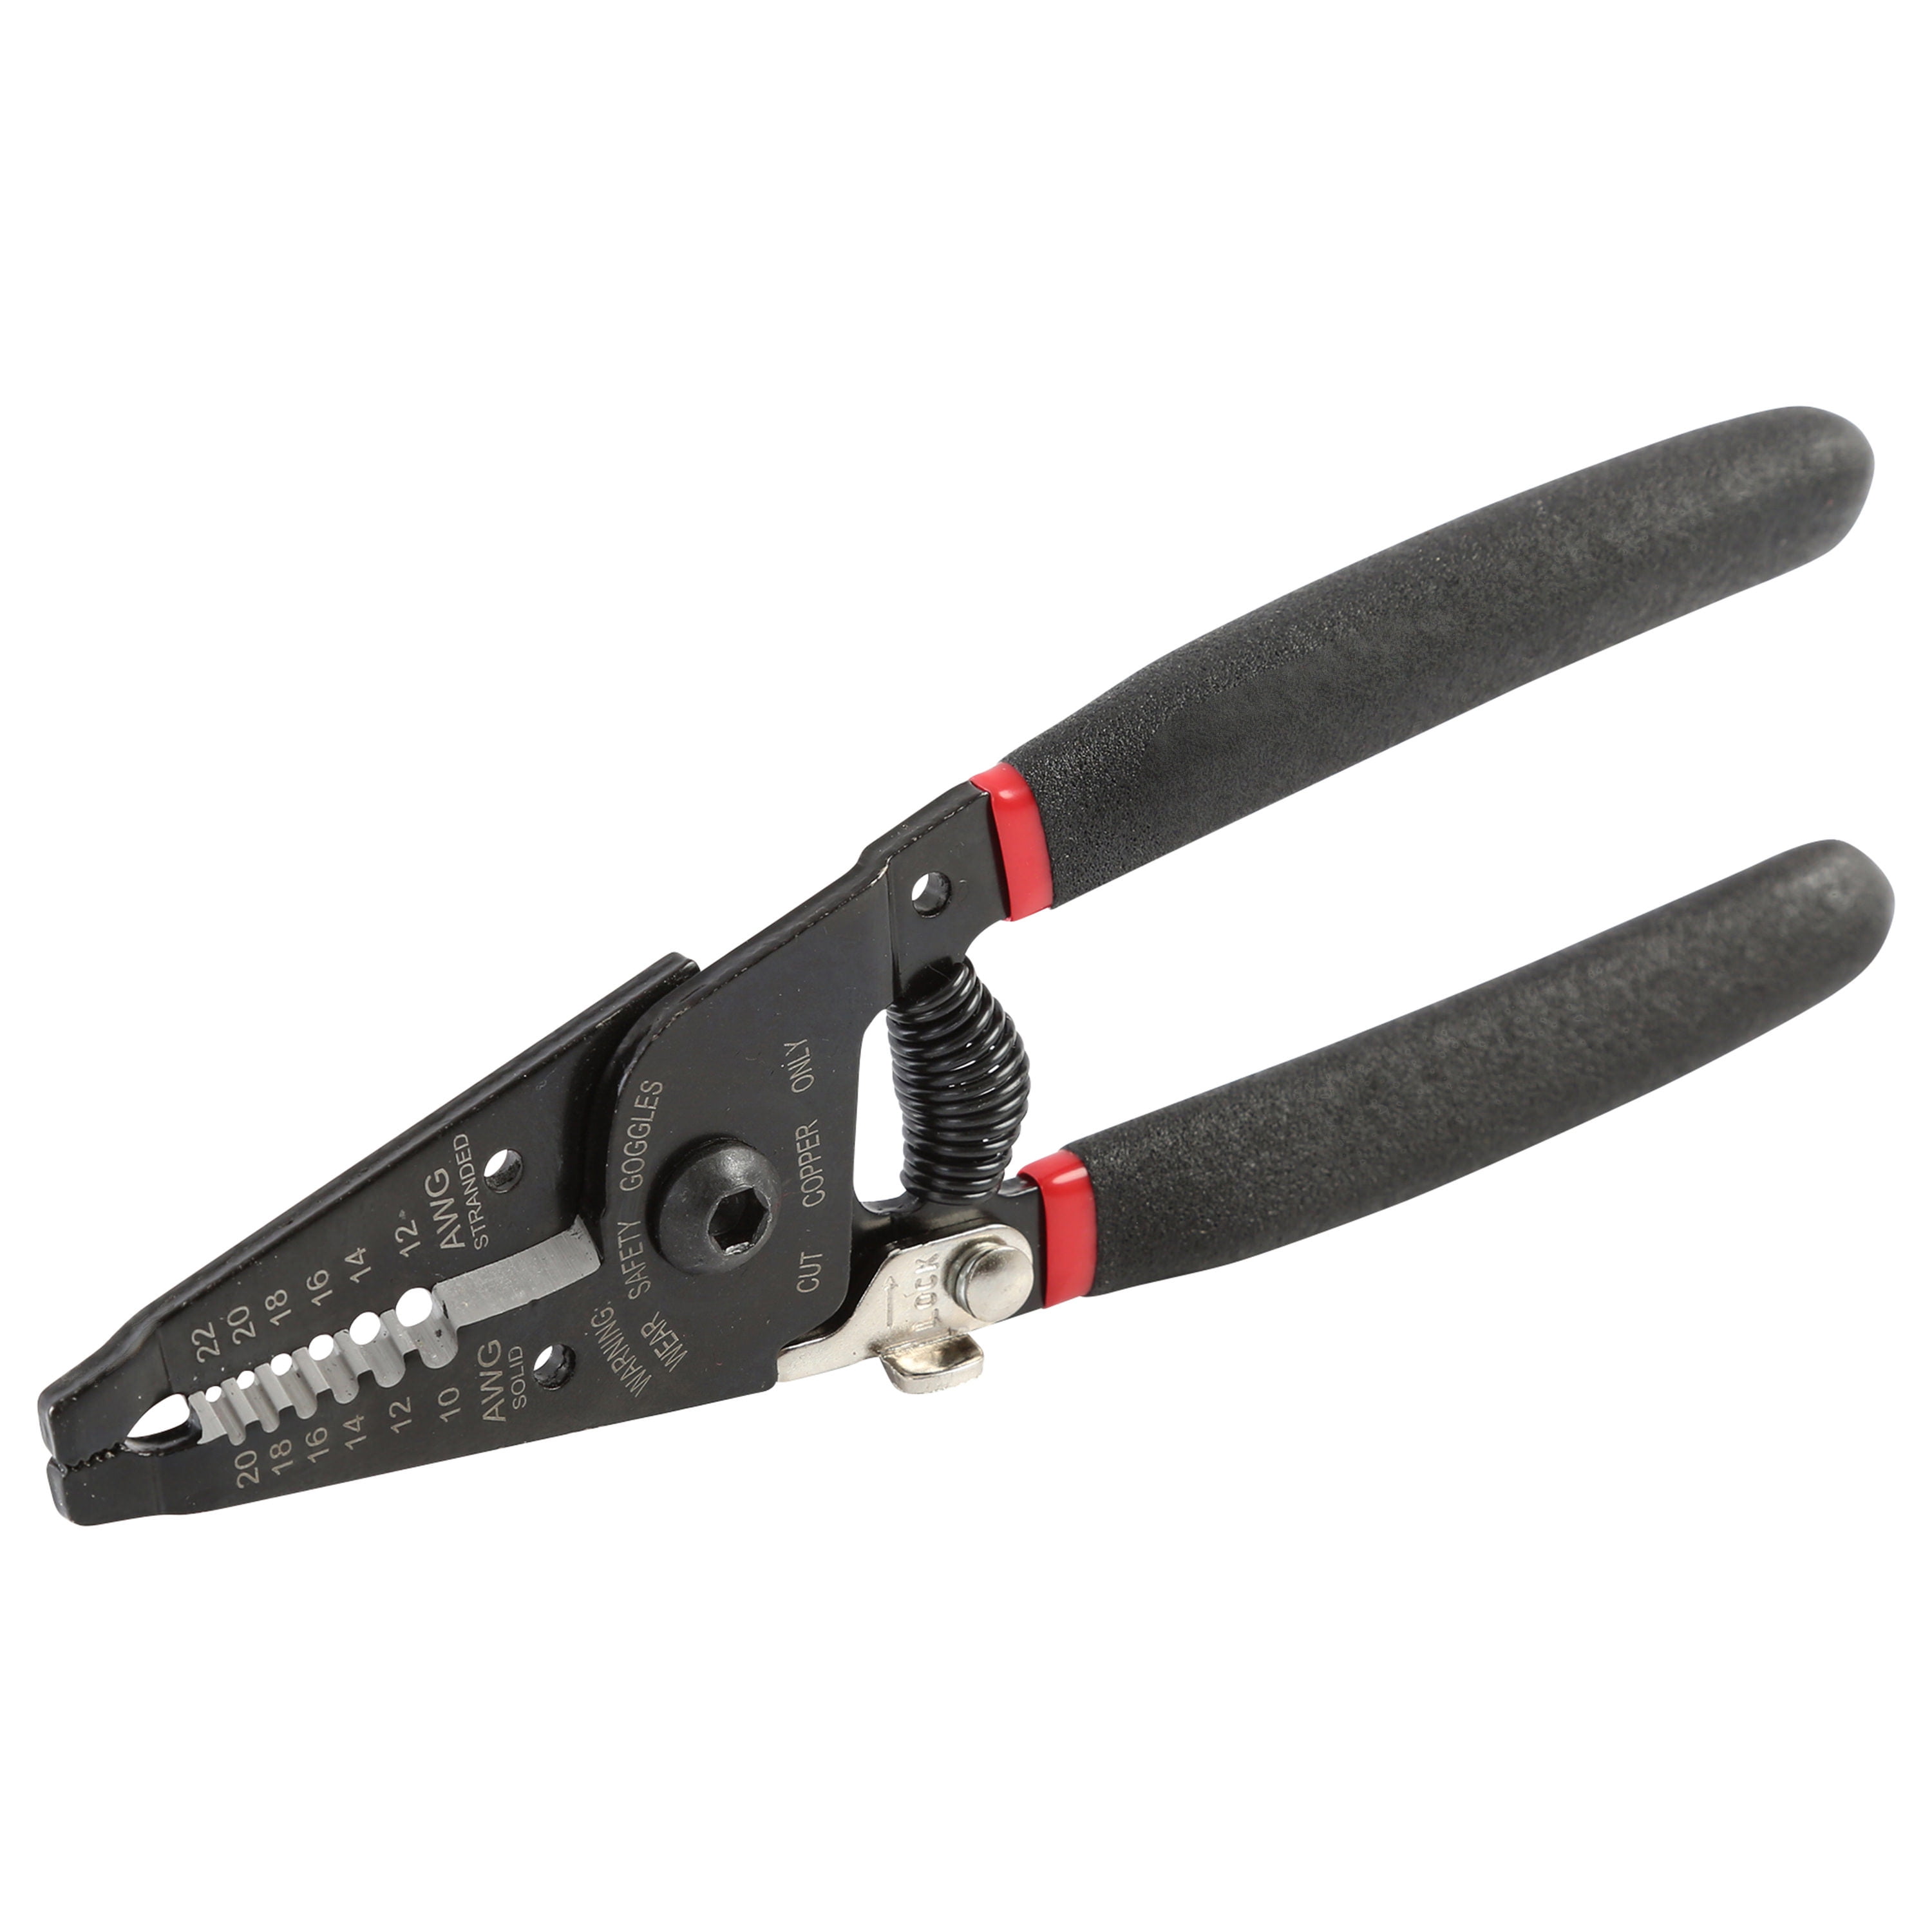 Wire Stripper,Multi Function Hand Tool Crimper/Pliers/Cutter,Professional Crimping for Industry,Stranded Wire Cutter,Solid Wire Cutter,Cuts Copper Wire